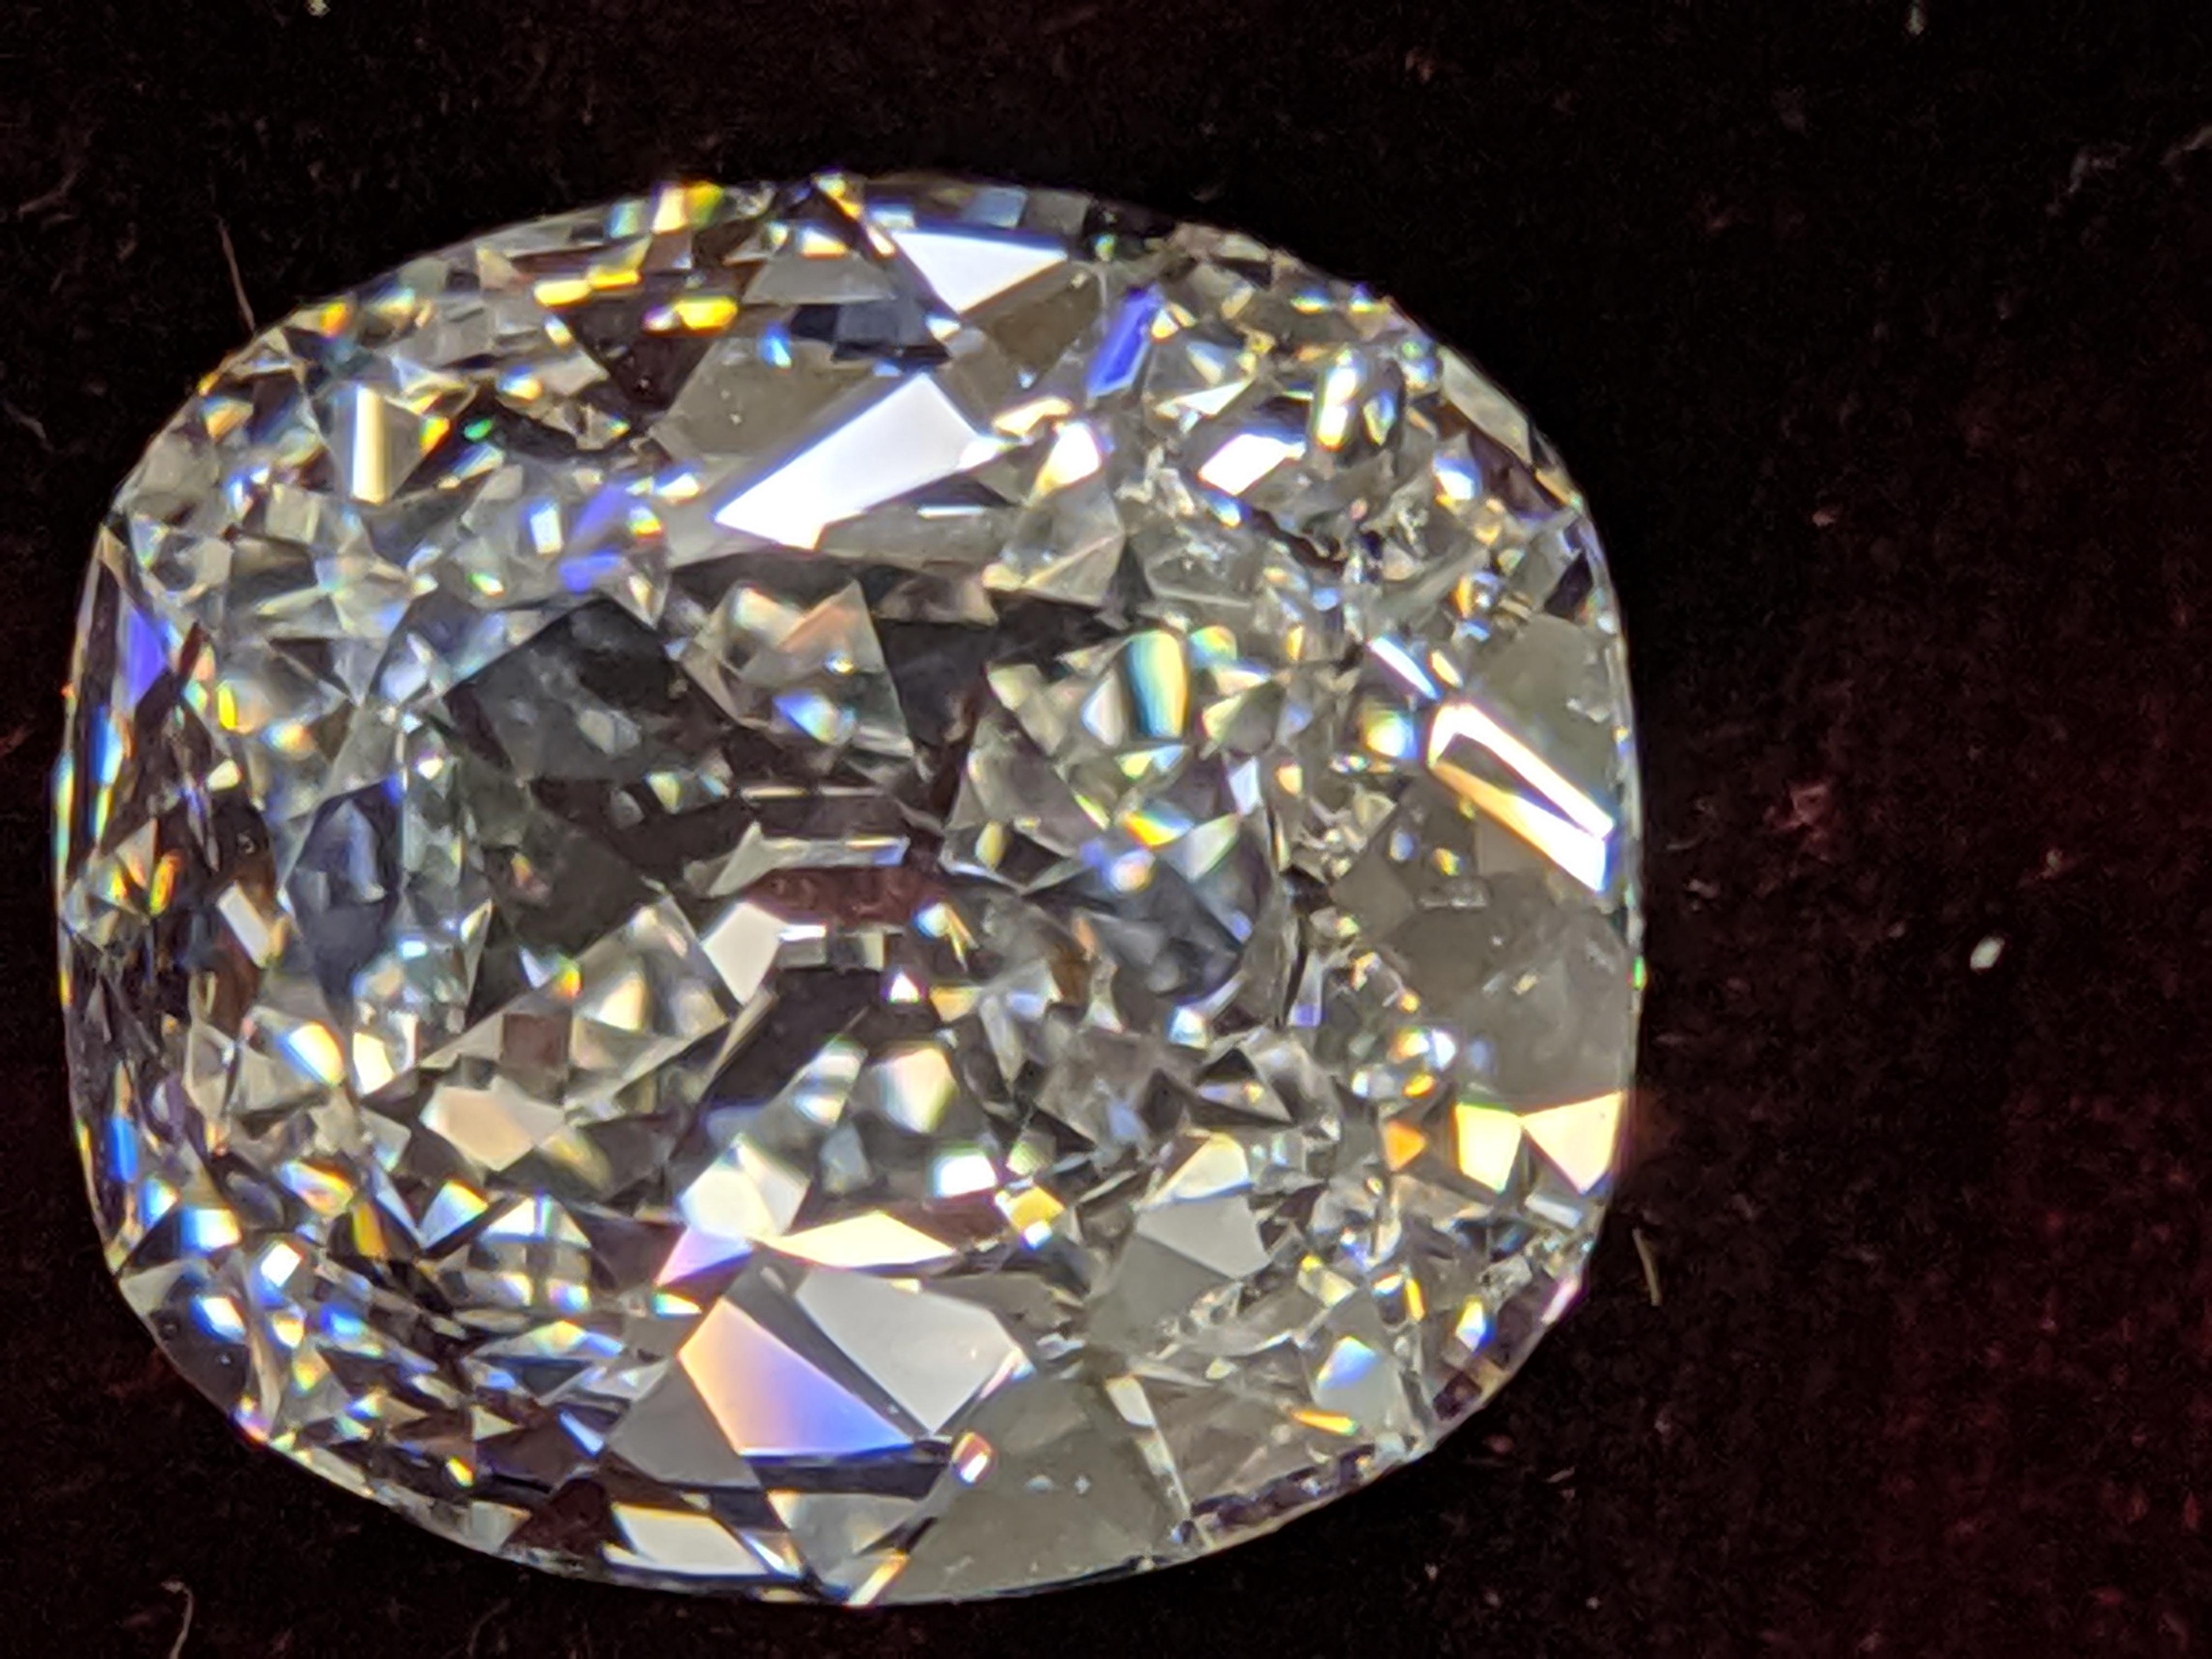 This astoundingly beautiful Cushion Cut diamond is photographed unmounted and in a temporary frame awaiting your desire to create a spectacular piece of important jewelry.  The GIA Report is included for this 6.27 carat F color VS1 clarity diamond